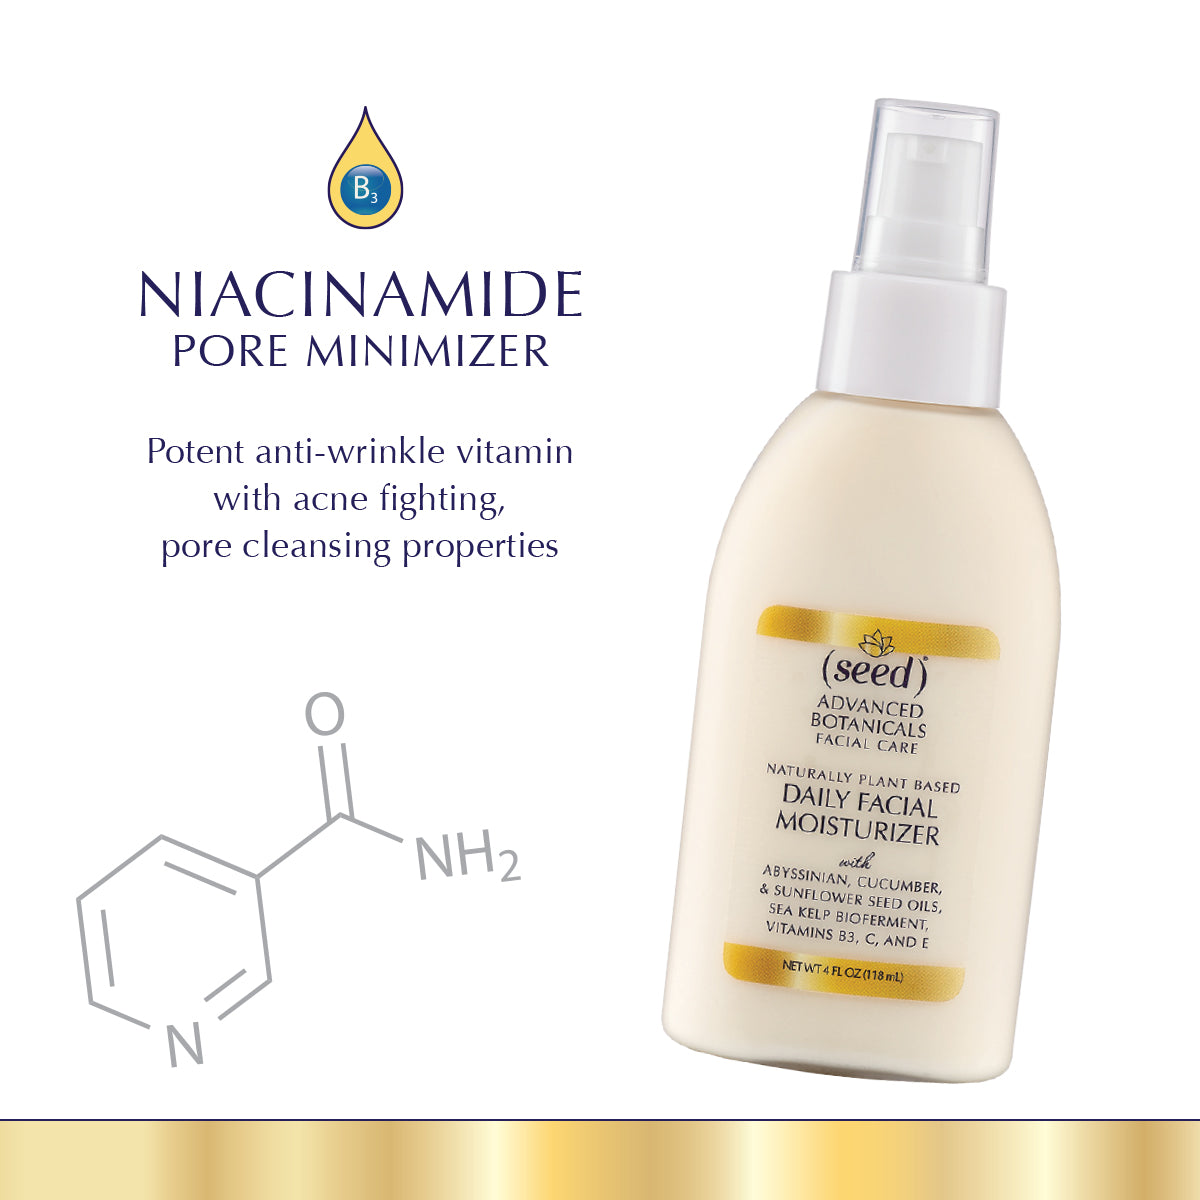 Seed Advanced Botanicals Daily Facial Moisturizing Lotion features Niacinamide